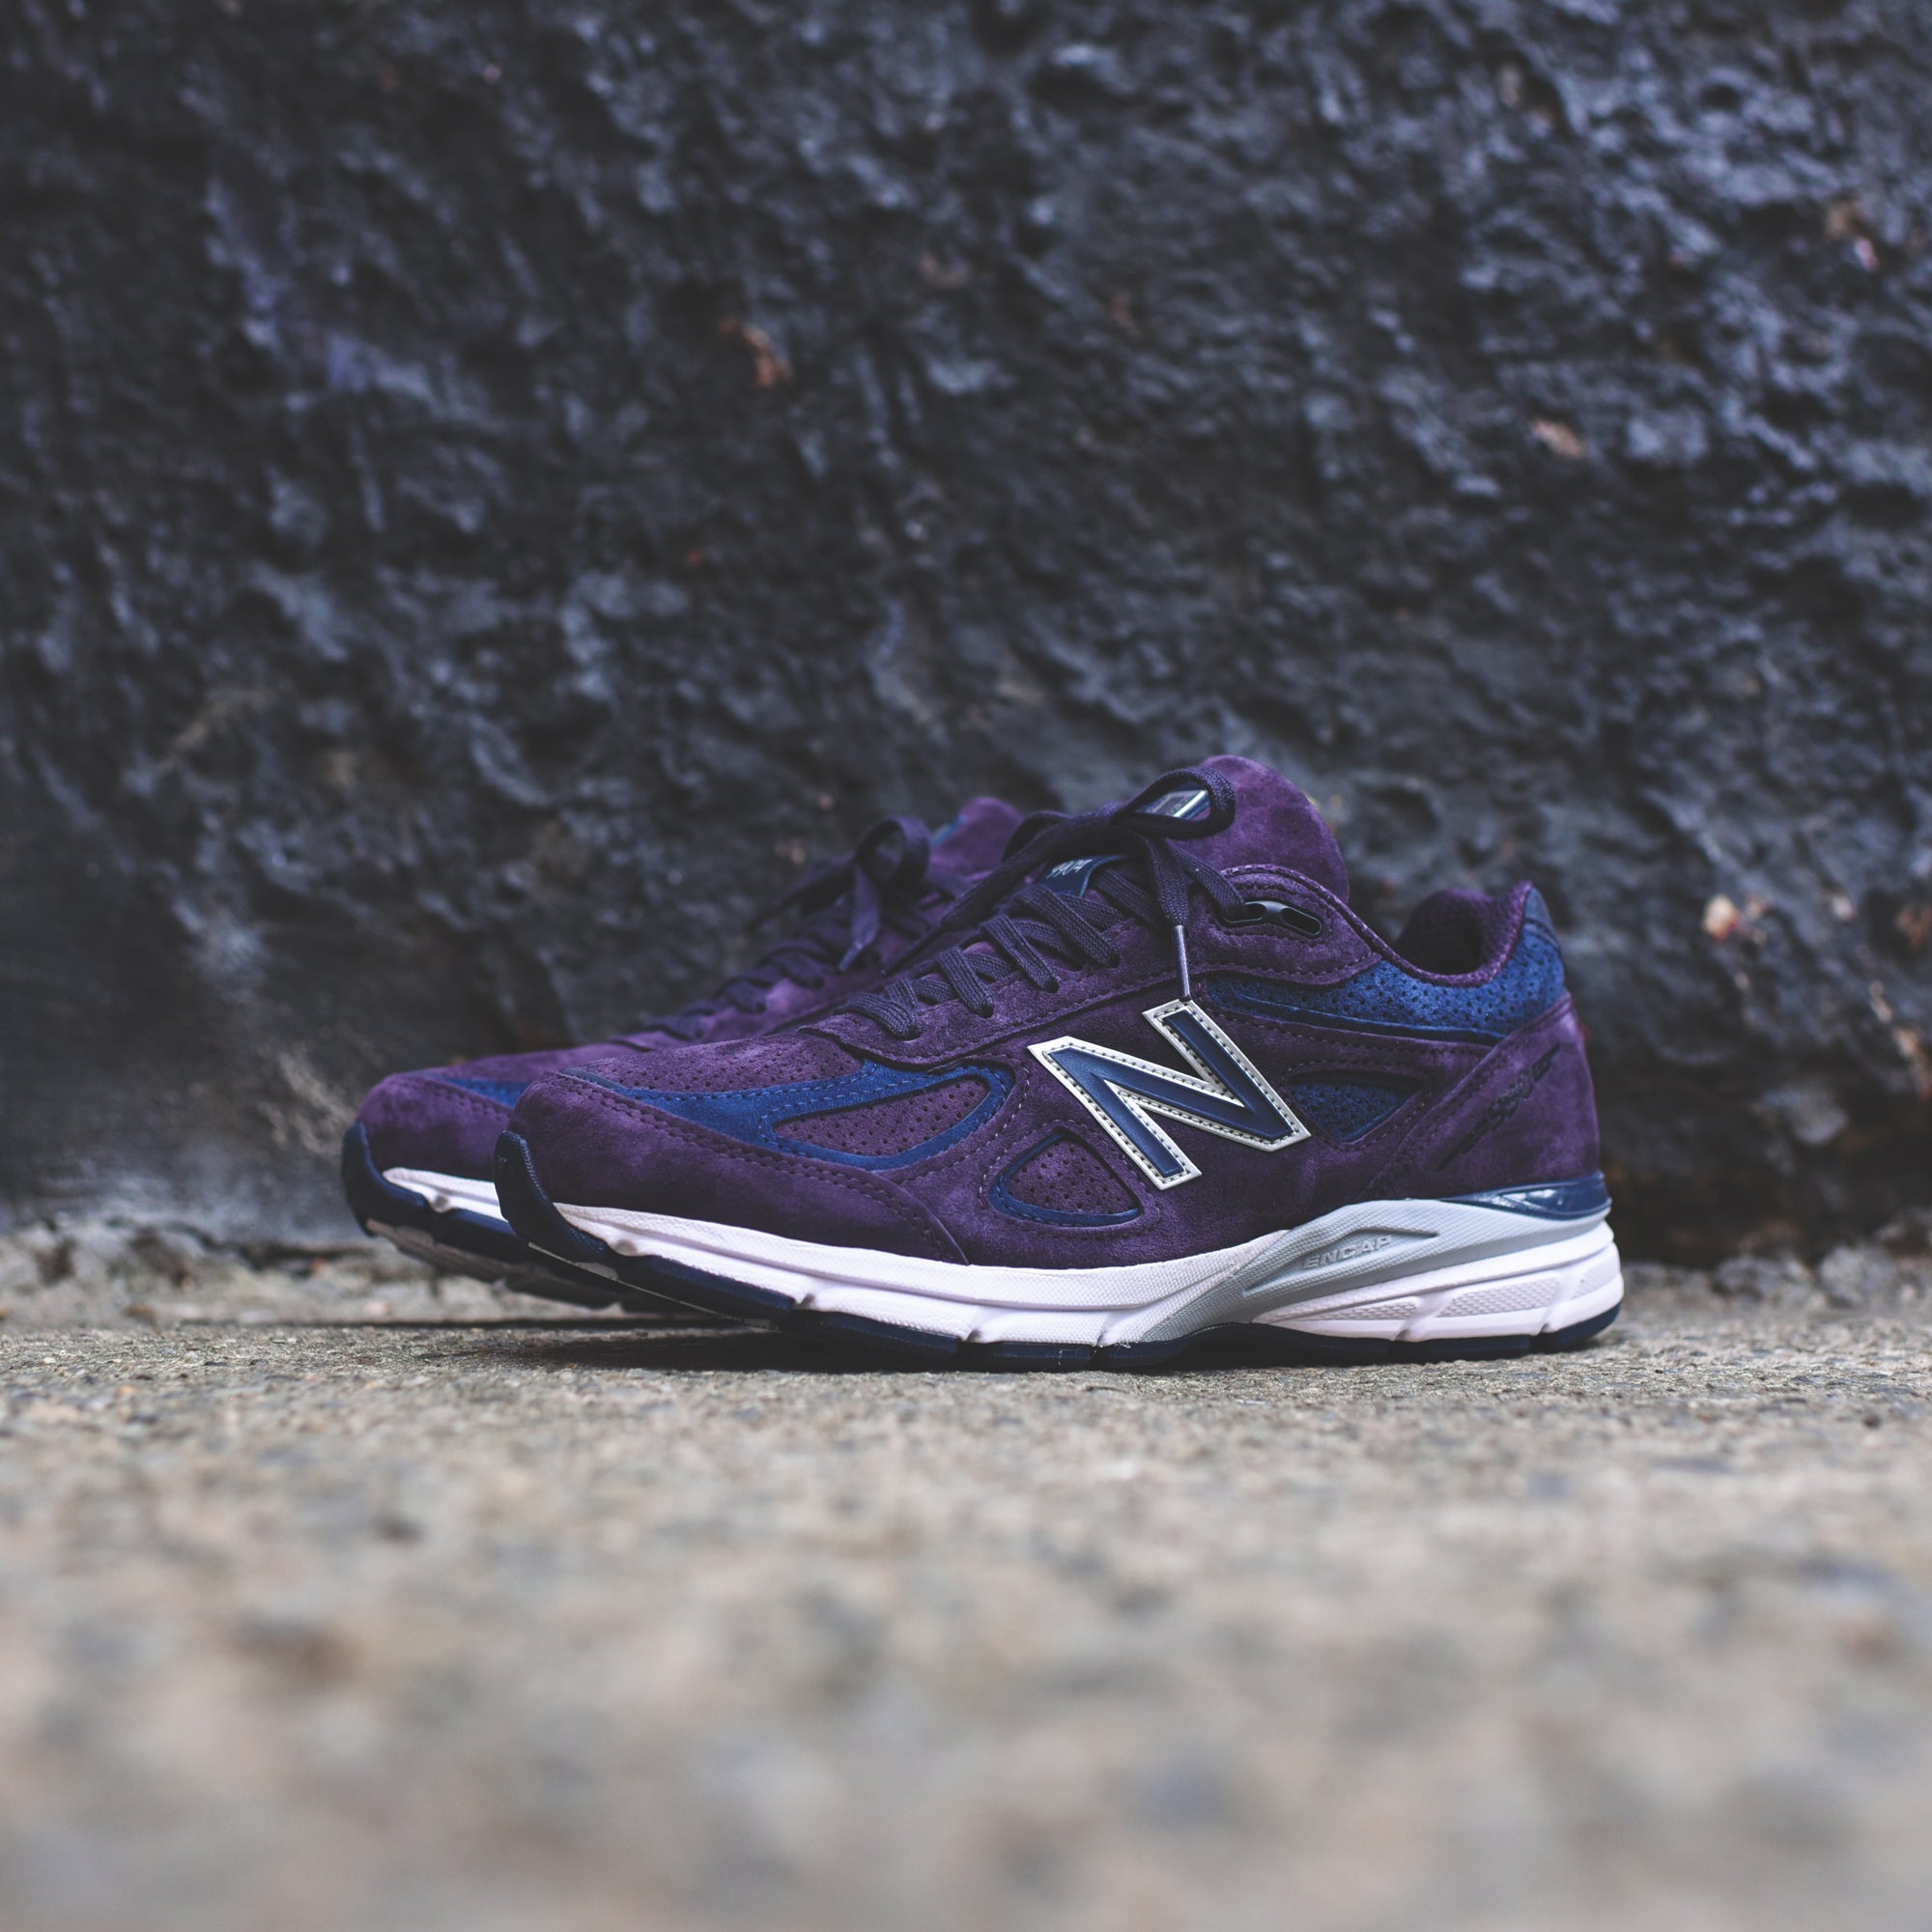 New Balance Made in US 990v4 